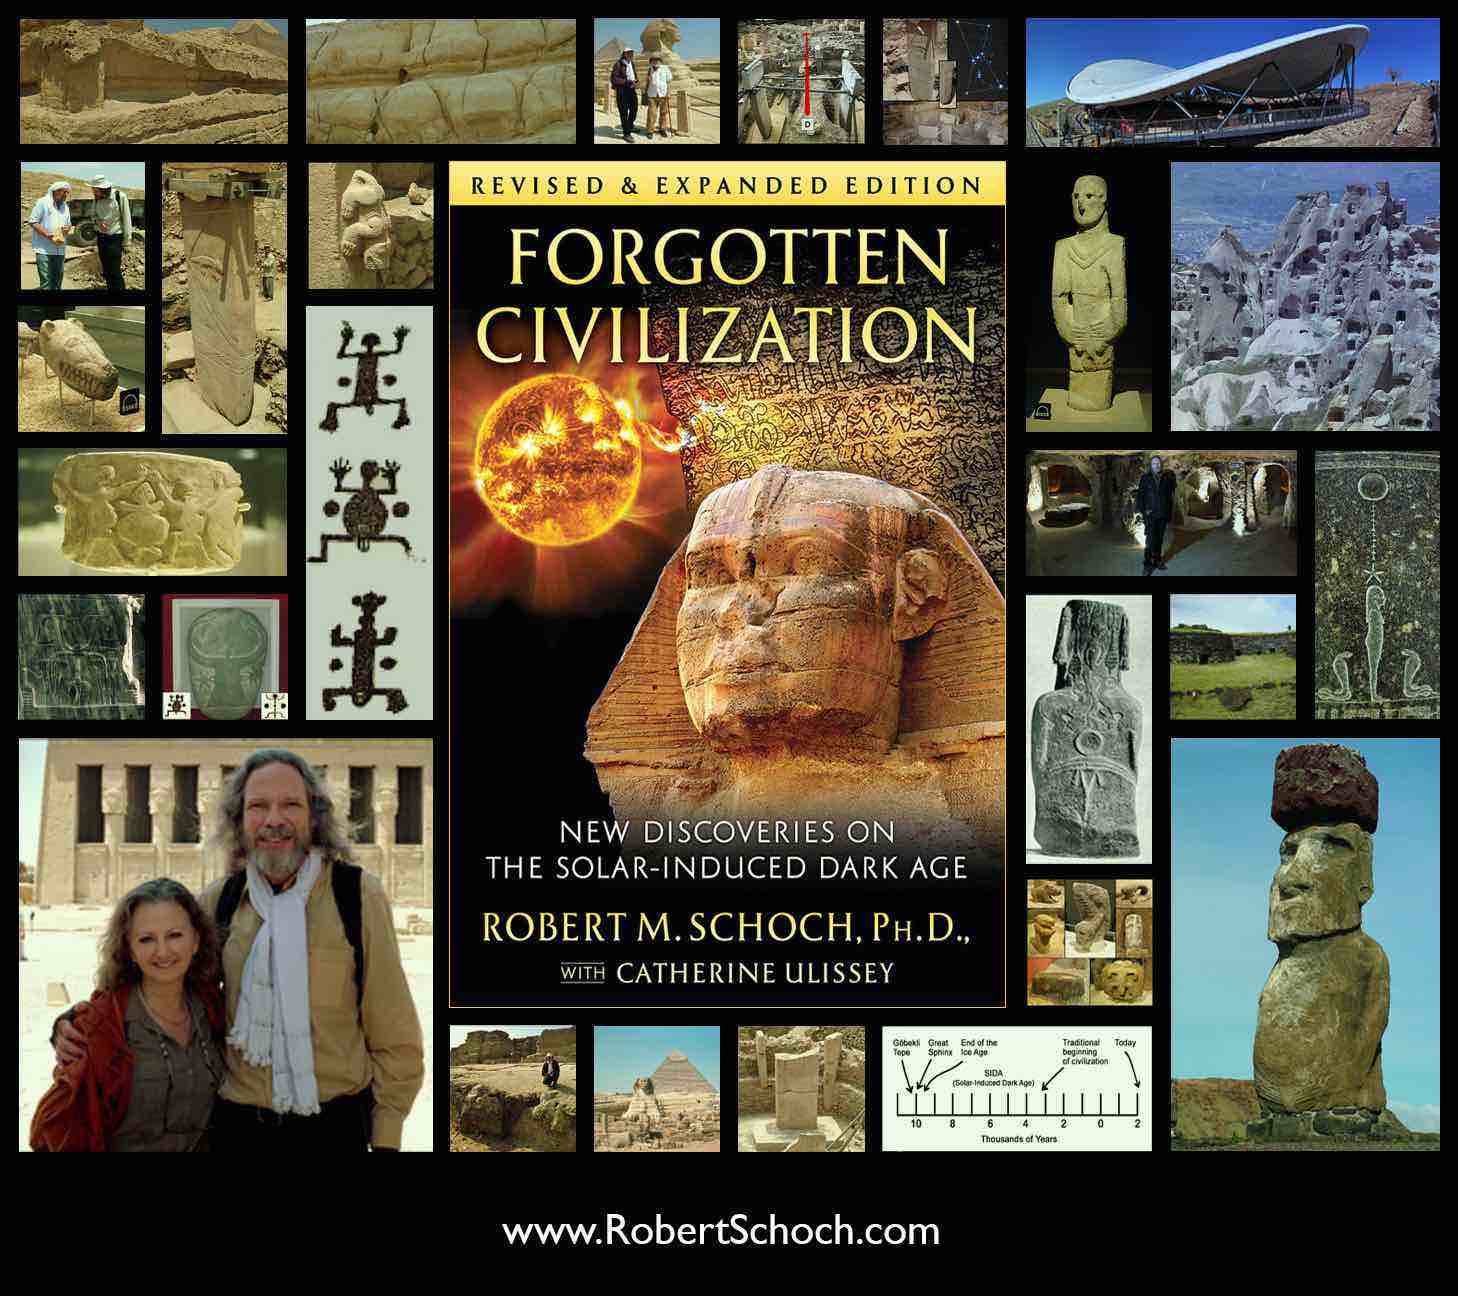 A montage of images from the 2nd (revised and expanded) edition (2021) of Forgotten Civilization: New Discoveries on the Solar-Induced Dark Age